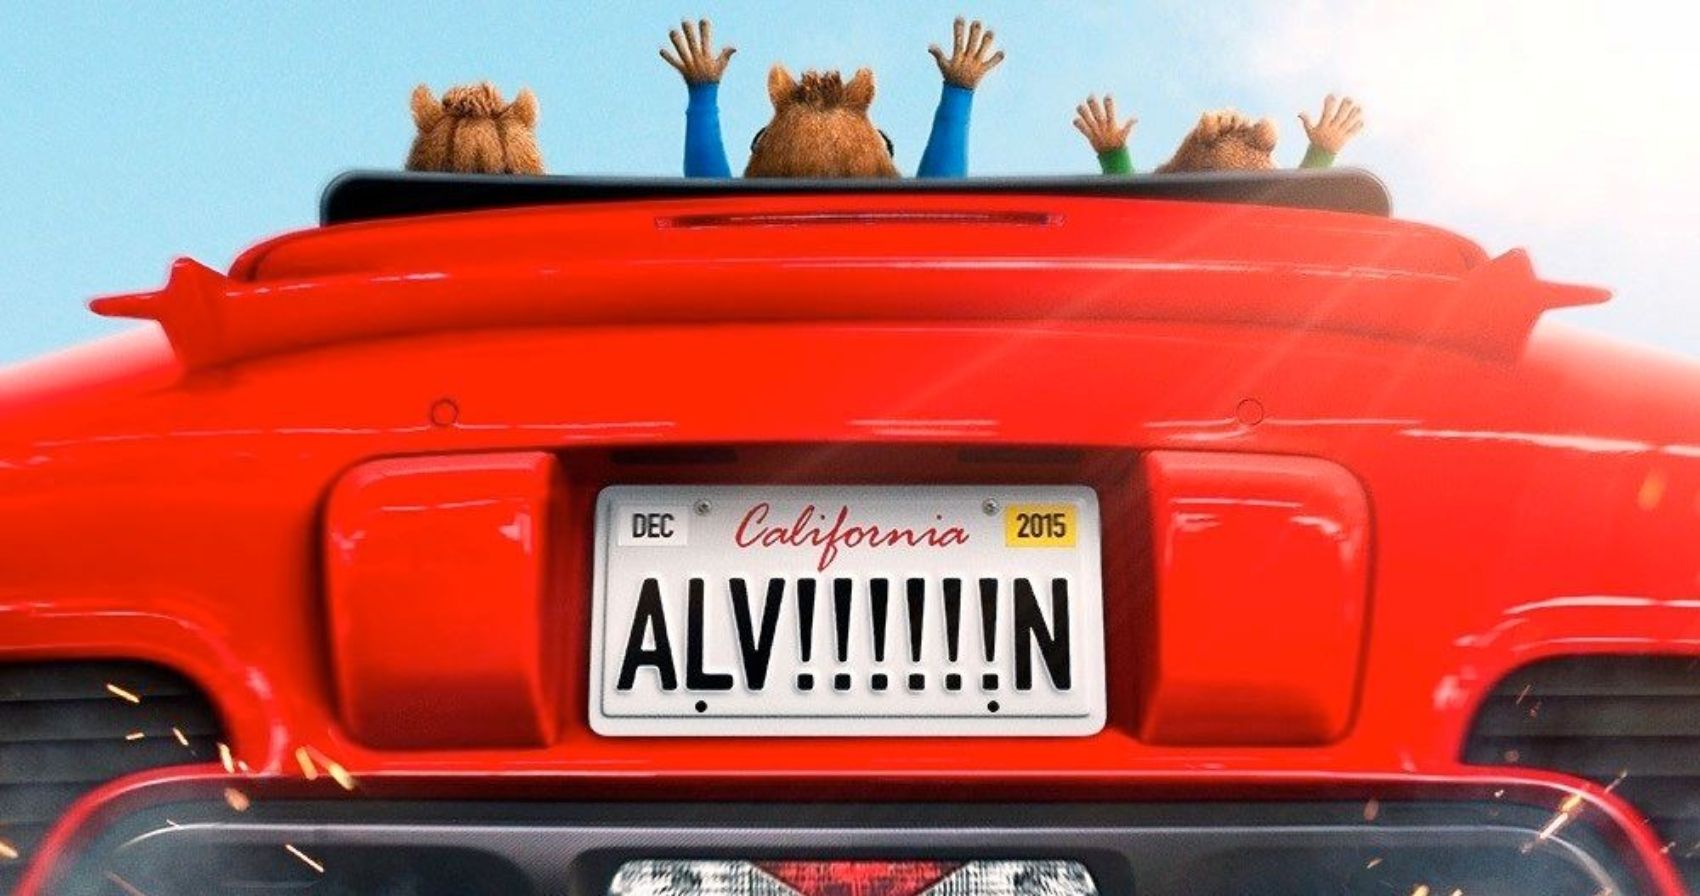 Alvin and the Chipmunks 4 Poster Kicks Off an Epic Road Trip (1)